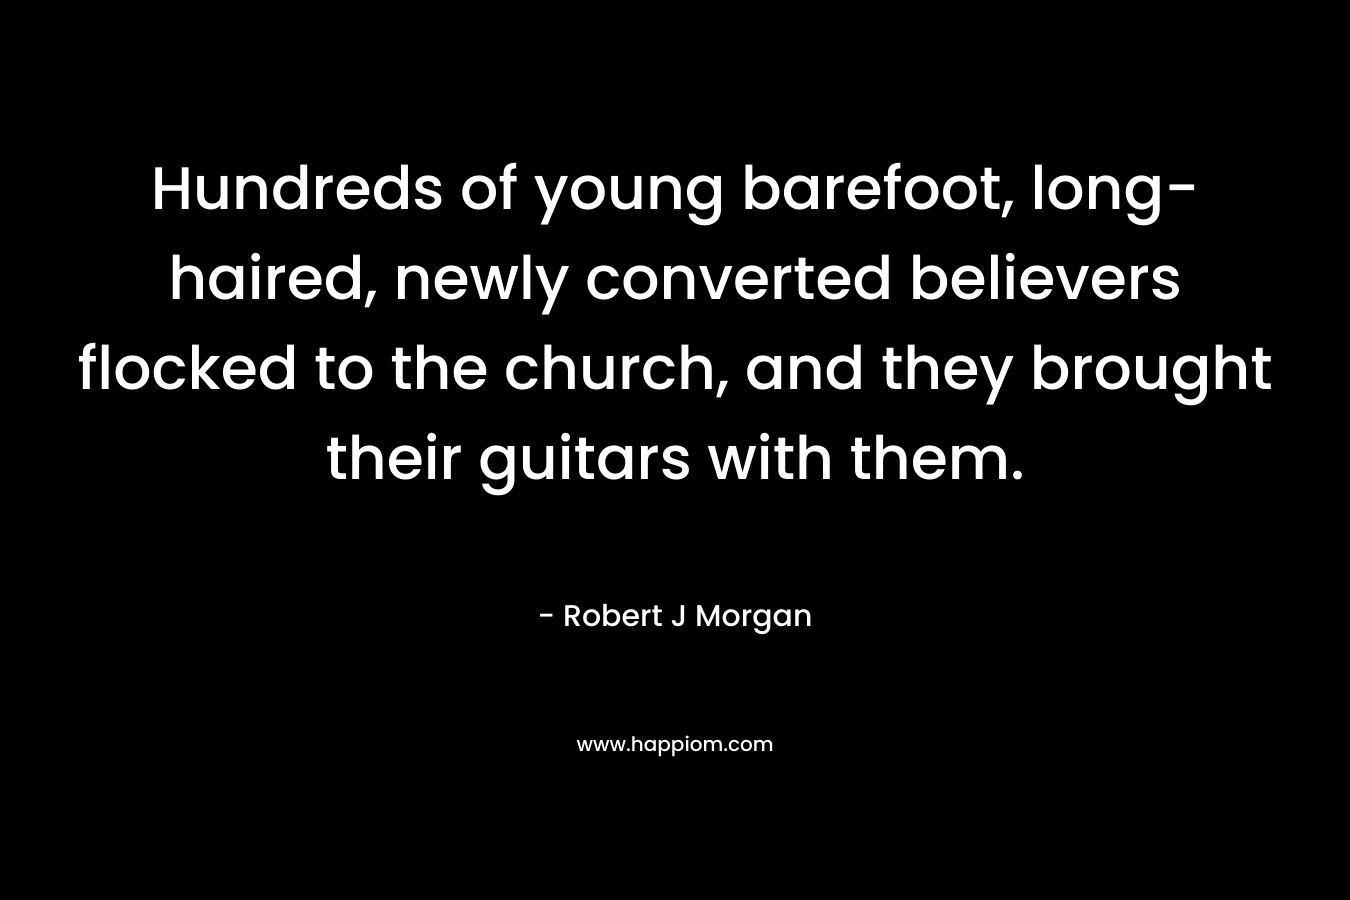 Hundreds of young barefoot, long-haired, newly converted believers flocked to the church, and they brought their guitars with them. – Robert J Morgan